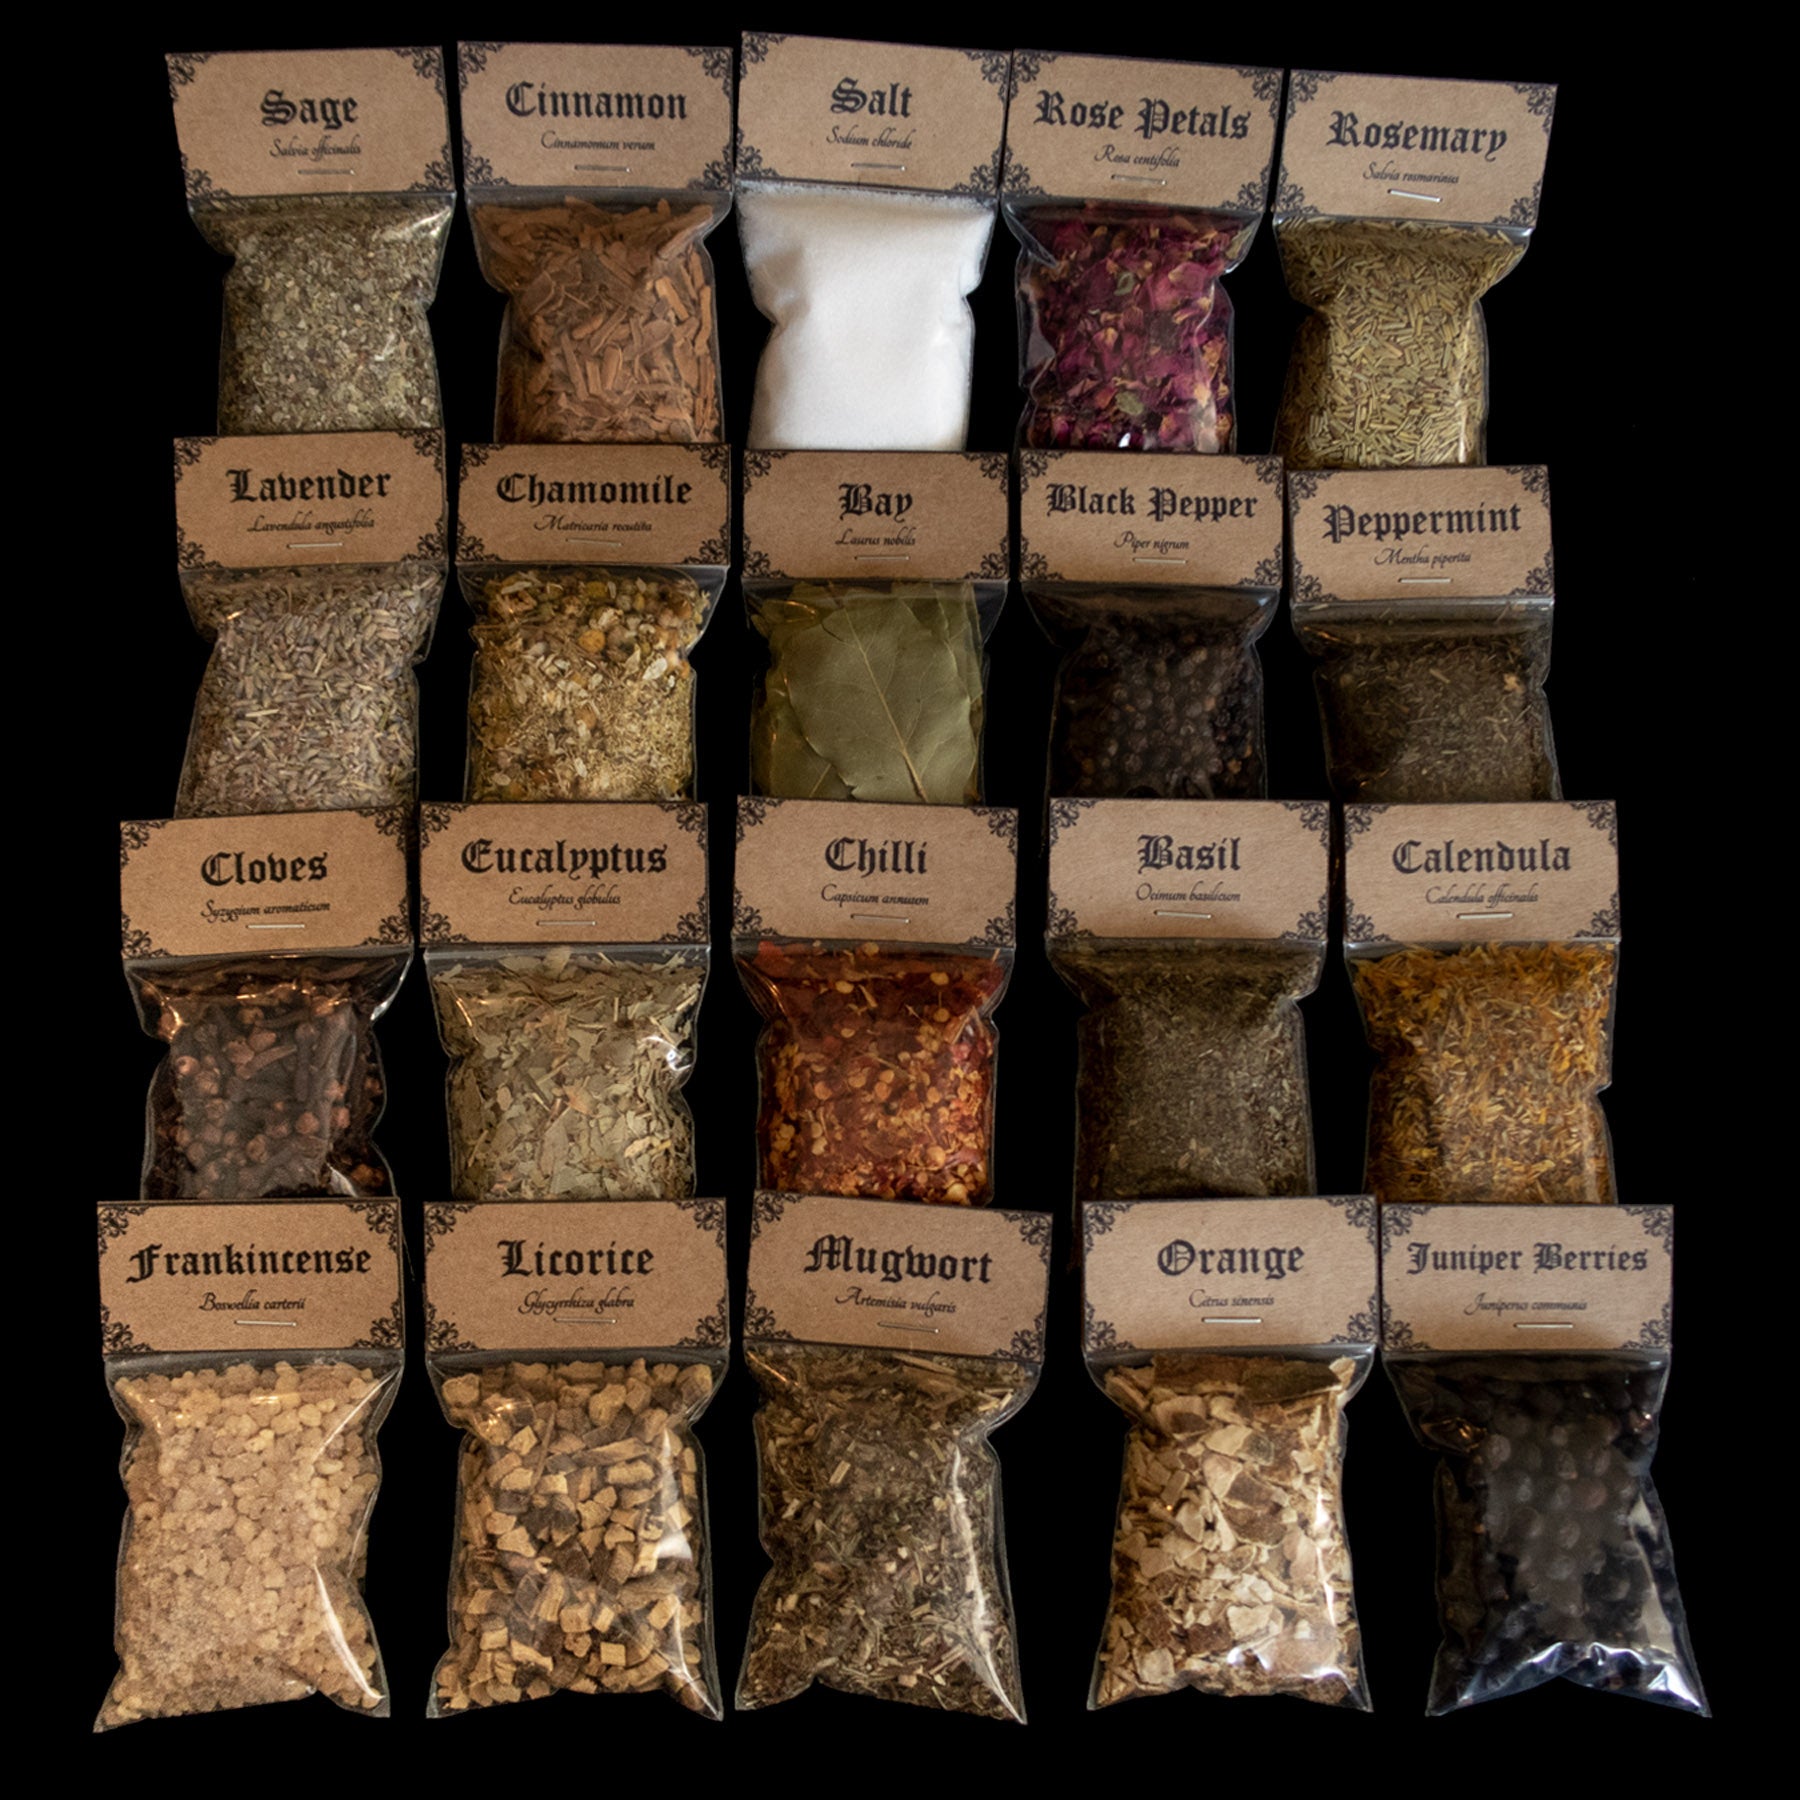 Extended Beginner Herb kit: A collection of 20 bags of herbs - Victorian-apothecary-style brown labels at the top give the common and Latin names